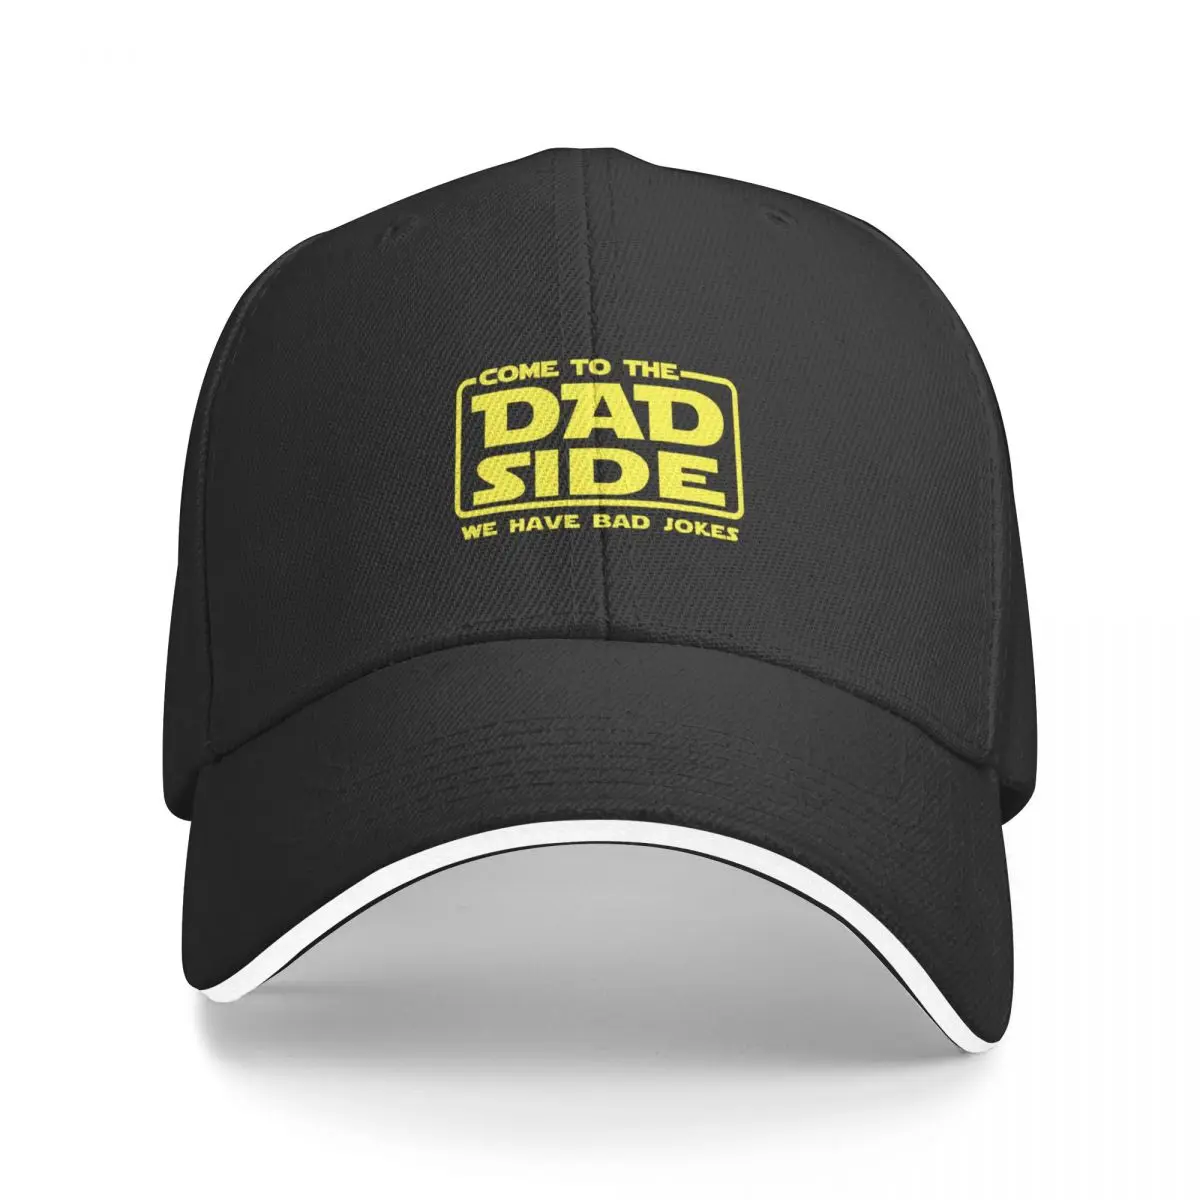 

New Come to the dad side we have bad jokes Baseball Cap Hood Uv Protection Solar Hat Sunhat Men Hat Women's